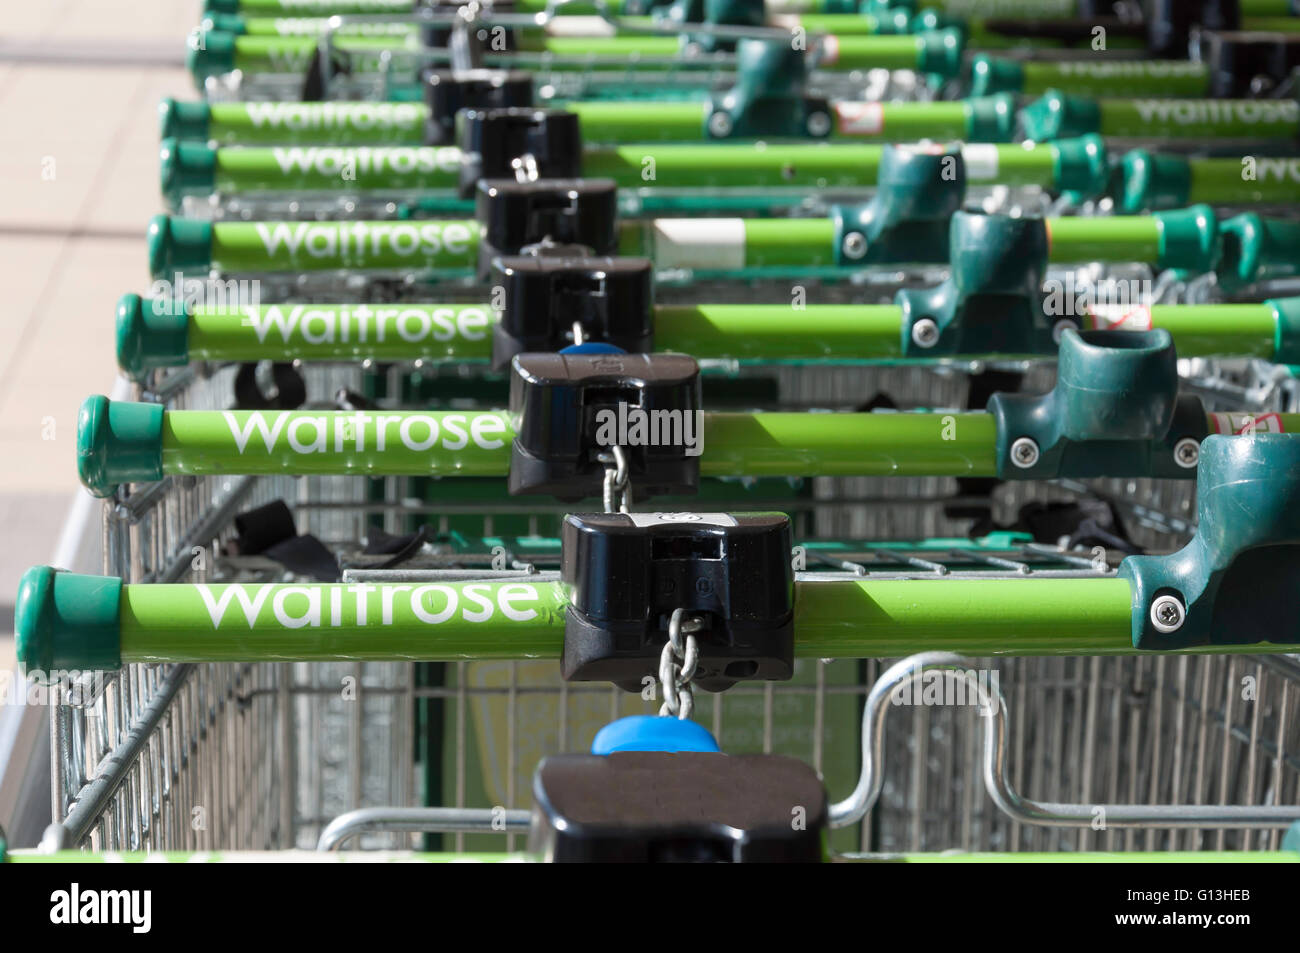 Waitrose Supermarket shopping trolleys,Two Rivers Shopping Centre, Staines-upon-Thames, Surrey, England, United Kingdom Stock Photo